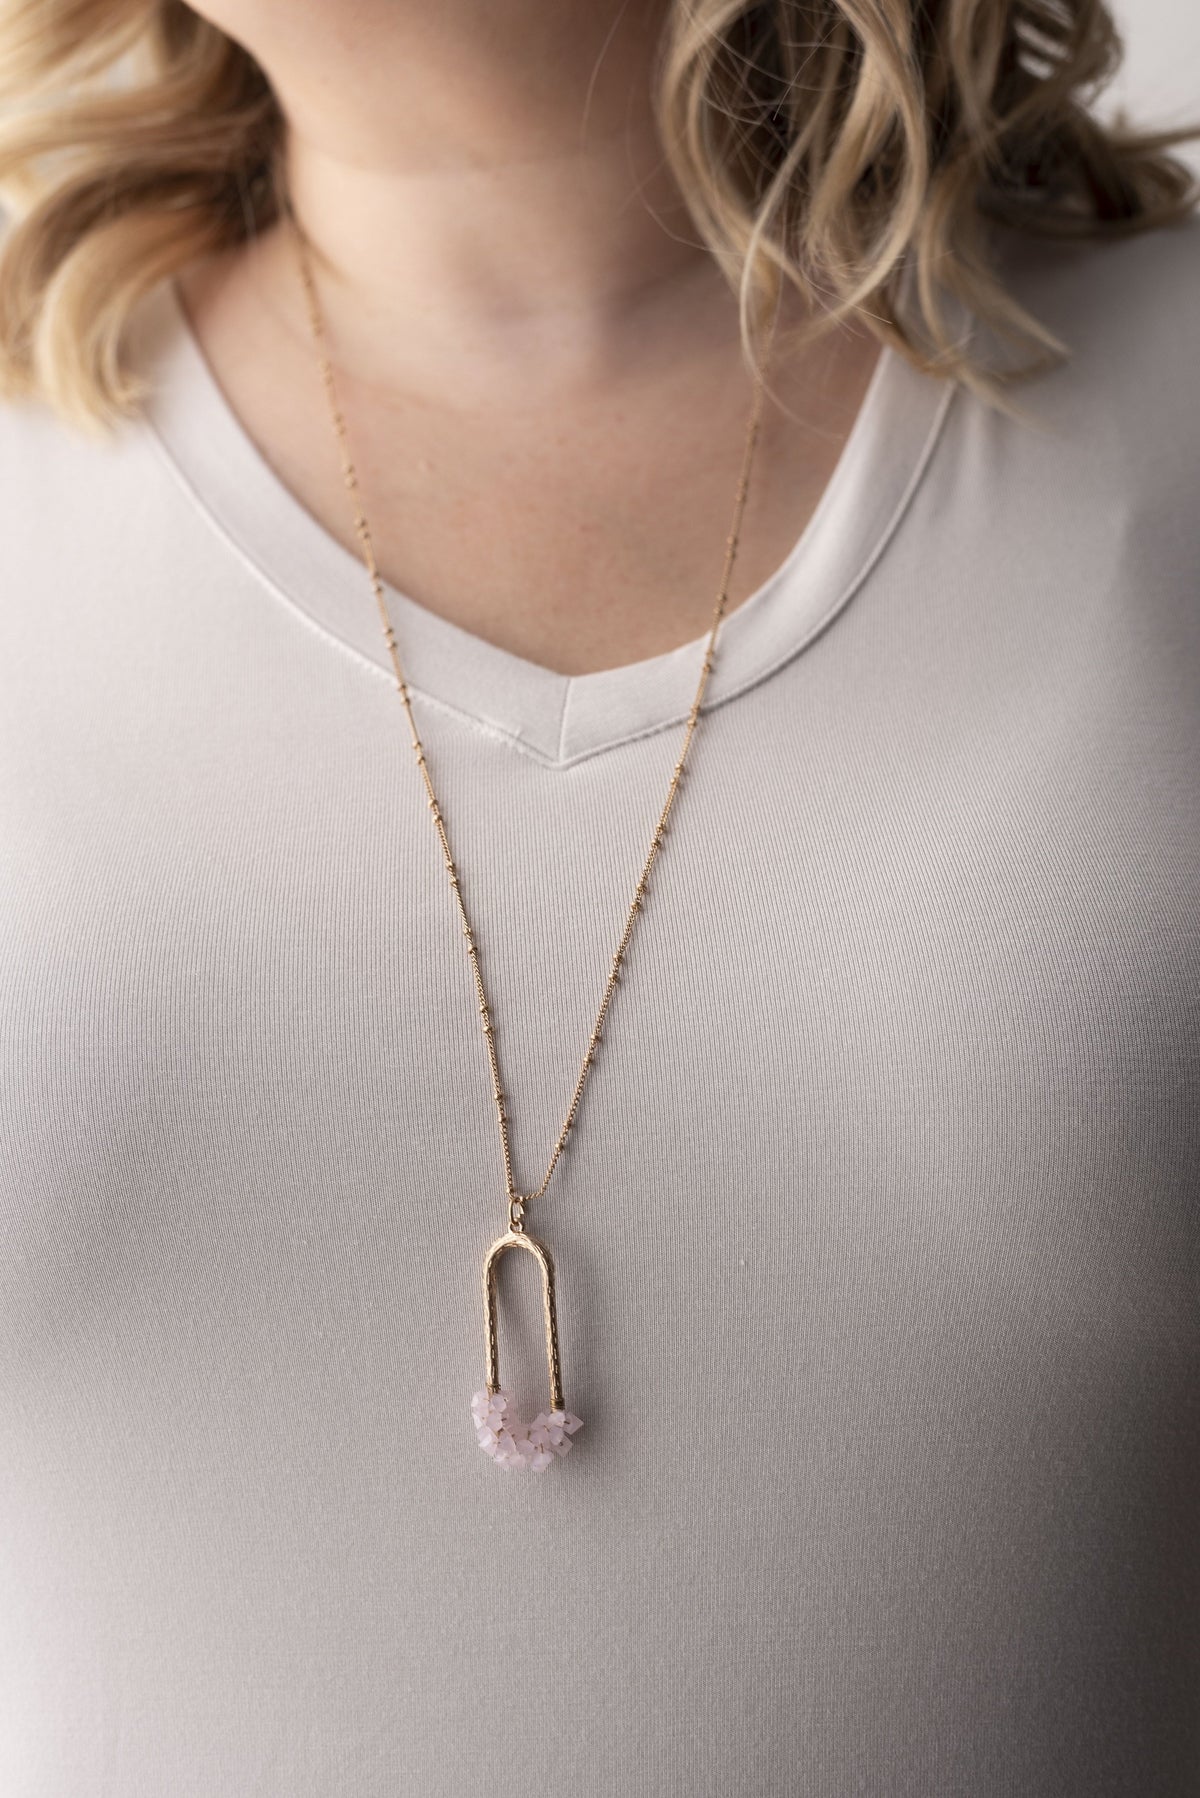 Rock Candy Necklace in Pink - Boutique 1780